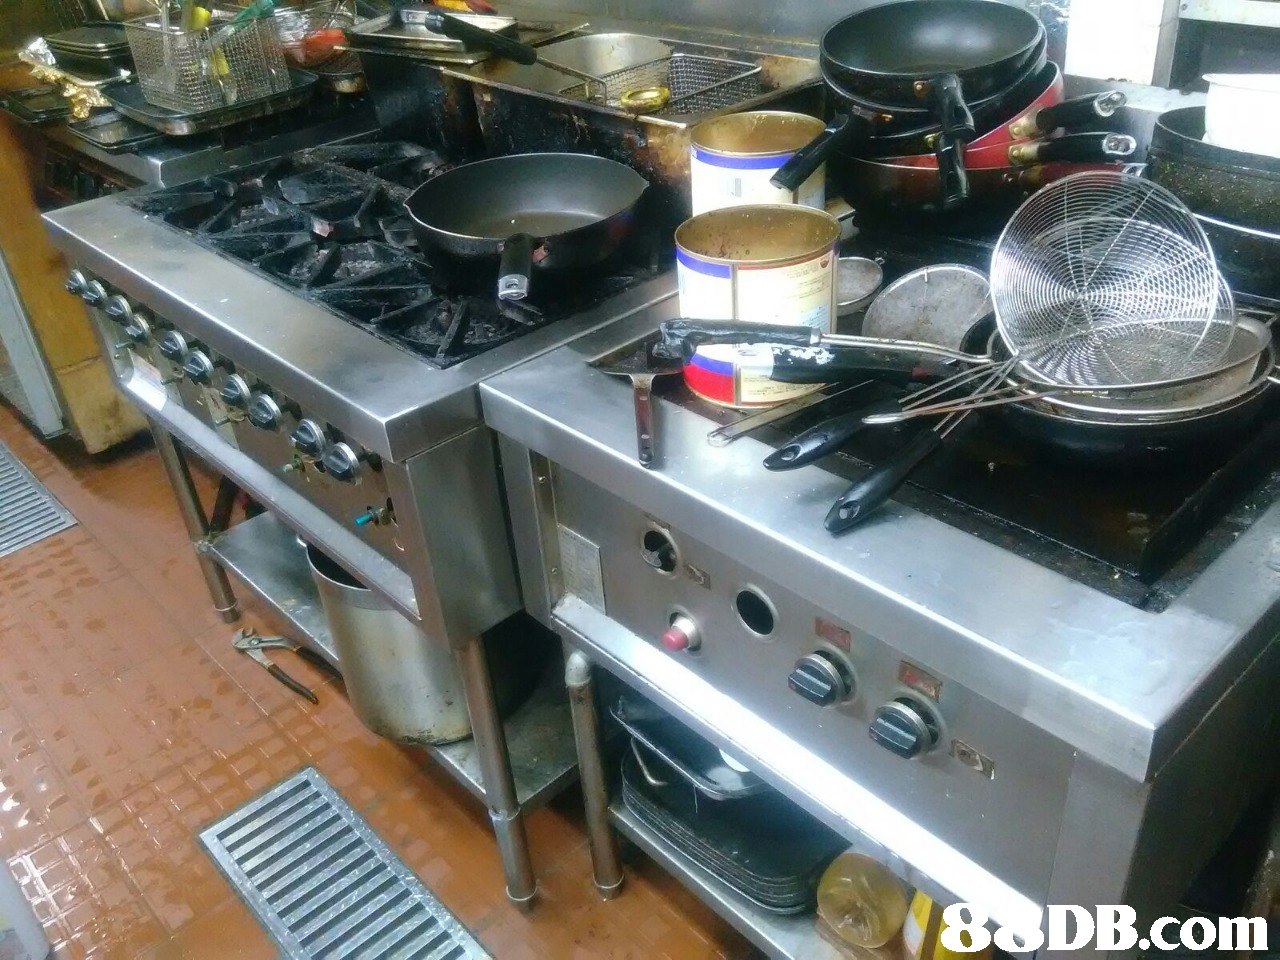 DB.com  Stove,Kitchen stove,Cooktop,Gas stove,Cookware and bakeware